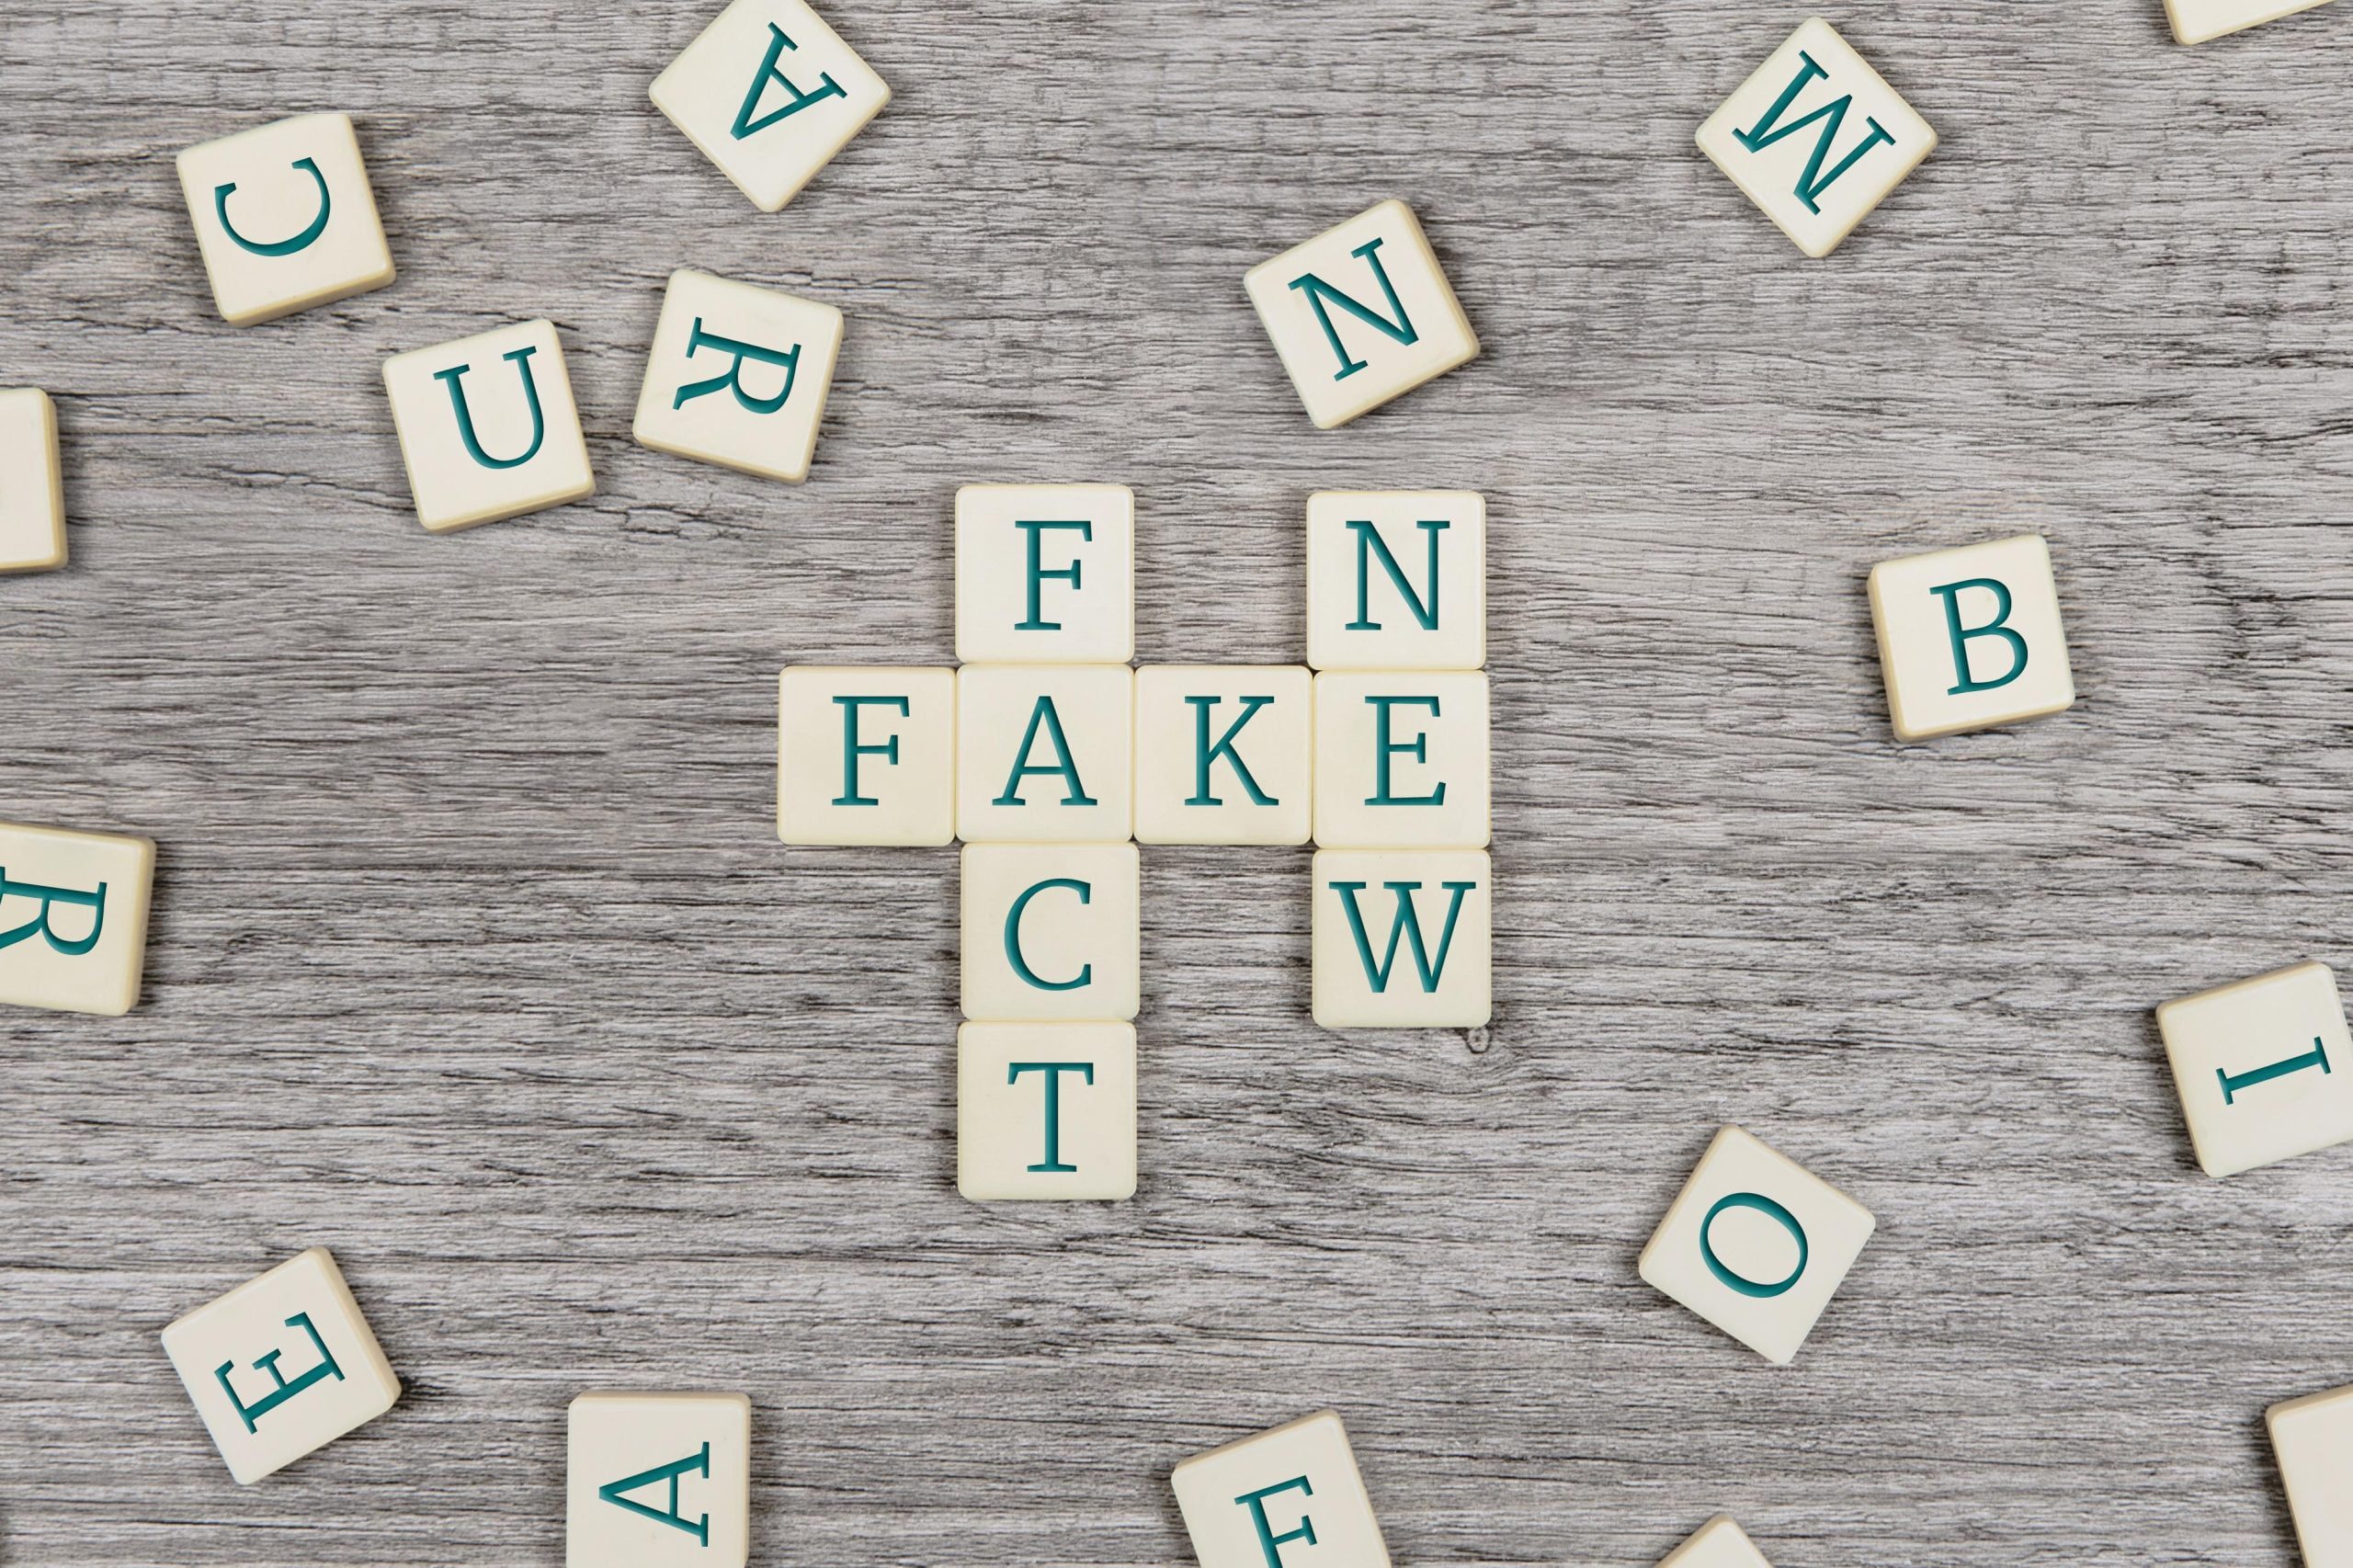 Scrabble letters spelling 'fact', 'fake' and 'new'